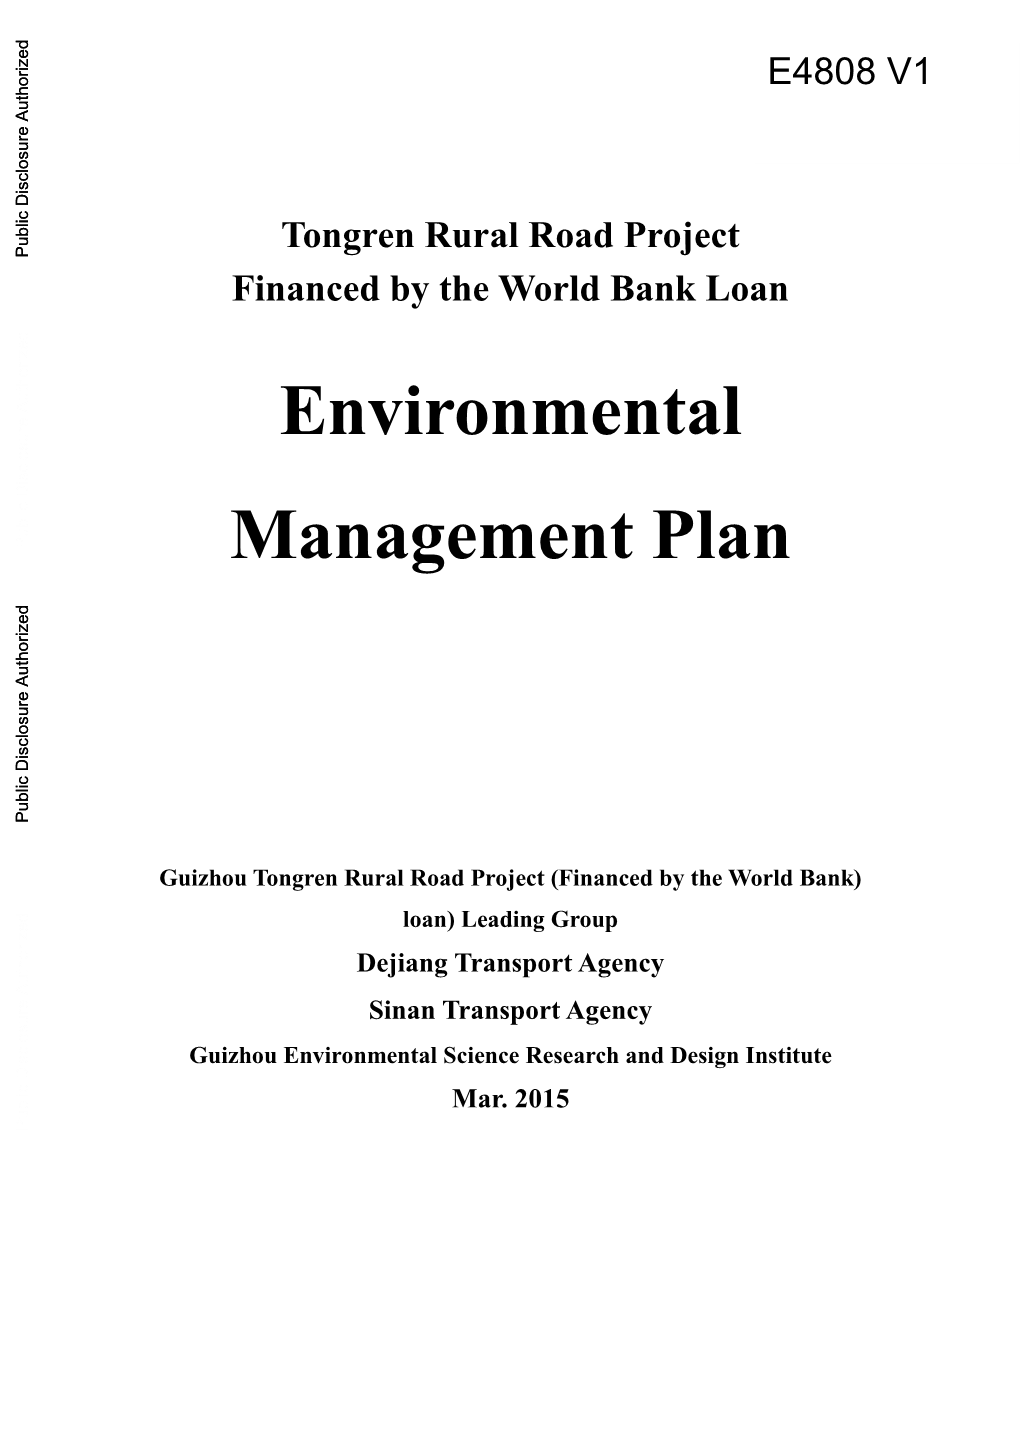 Tongren Rural Road Project Financed by the World Bank Loan Environmental Management Plan